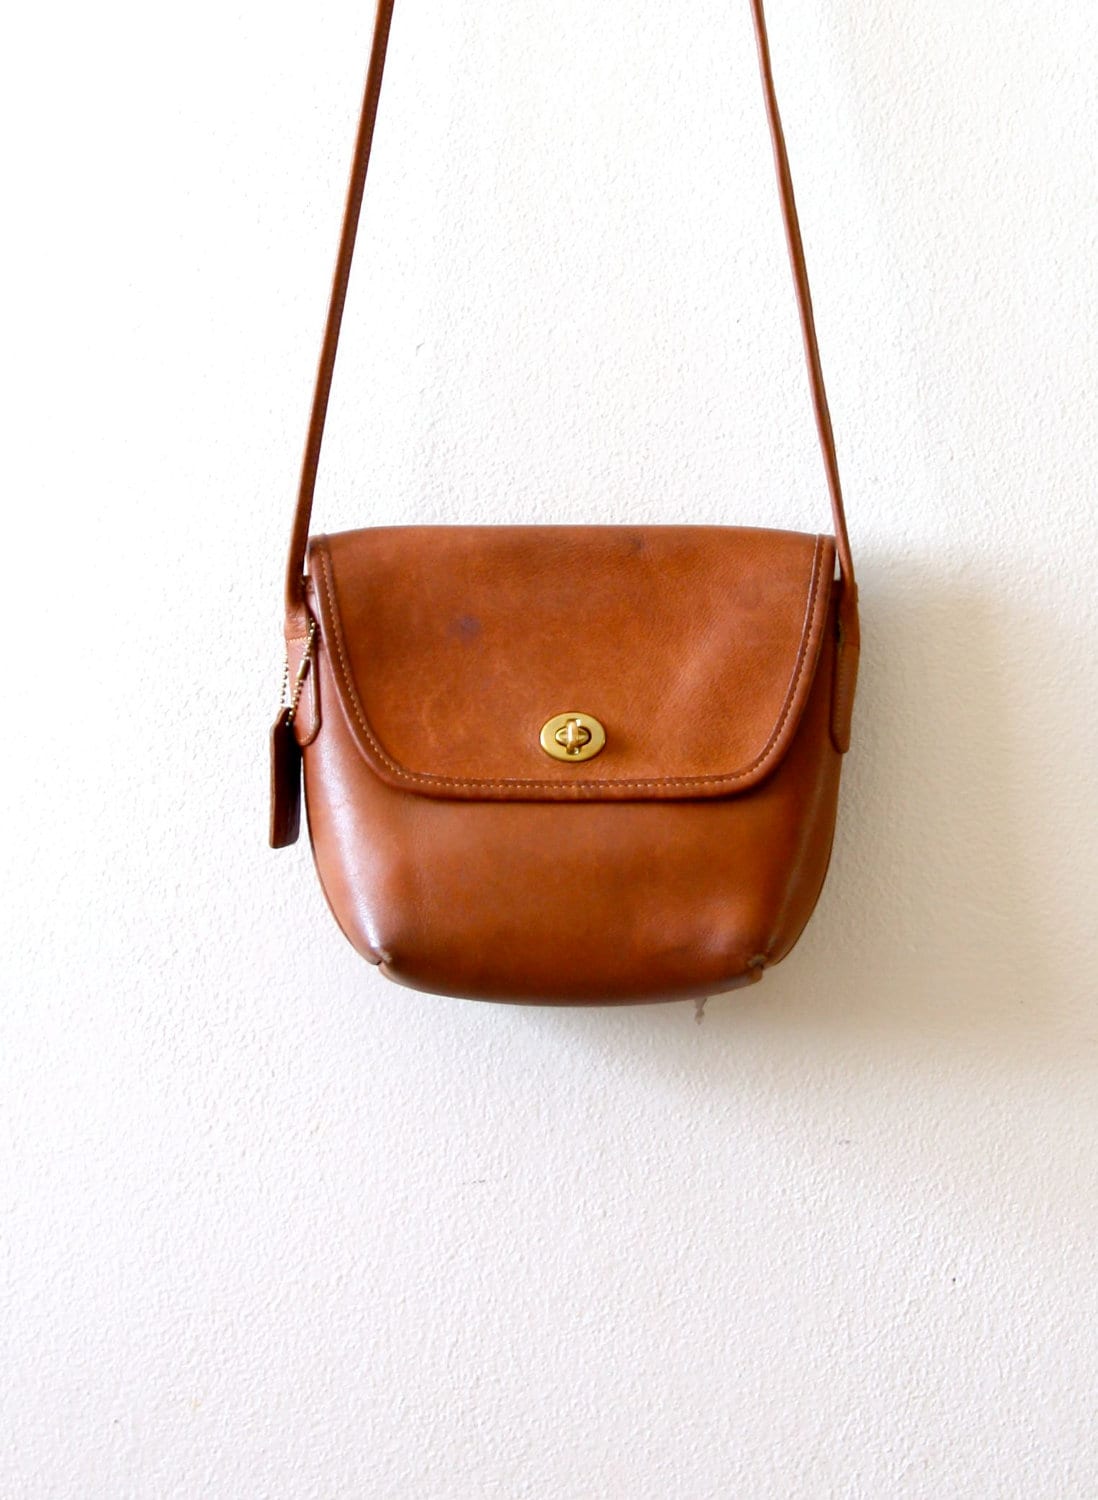 Coach Small Brown Leather Purses | Paul Smith